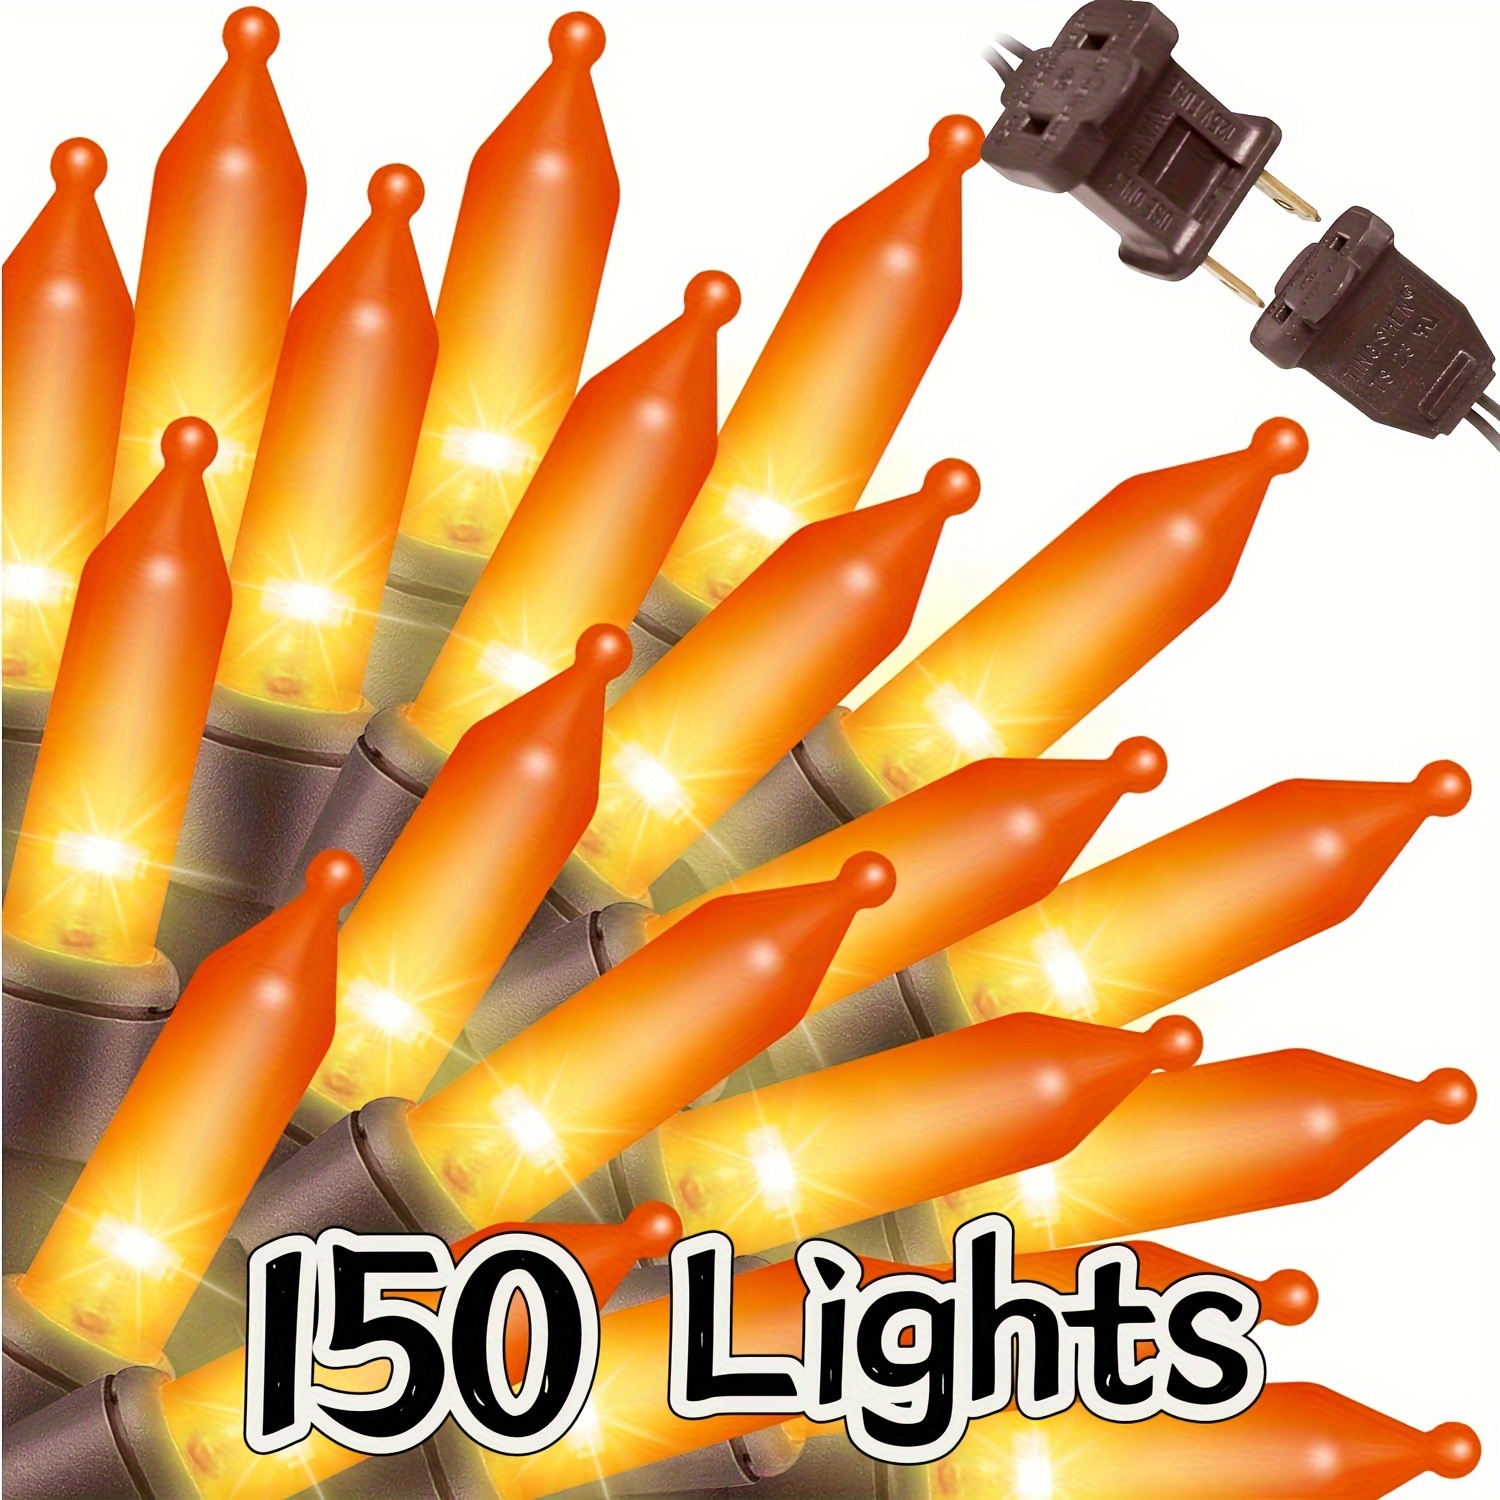 

31.9ft 150-count Halloween Decoration Lights With Brown Wire, String Lights For Holiday Decorations, Halloween Tree Lights, Holiday Party, Home, Indoor & Outdoor Use (brown Wire Orange)